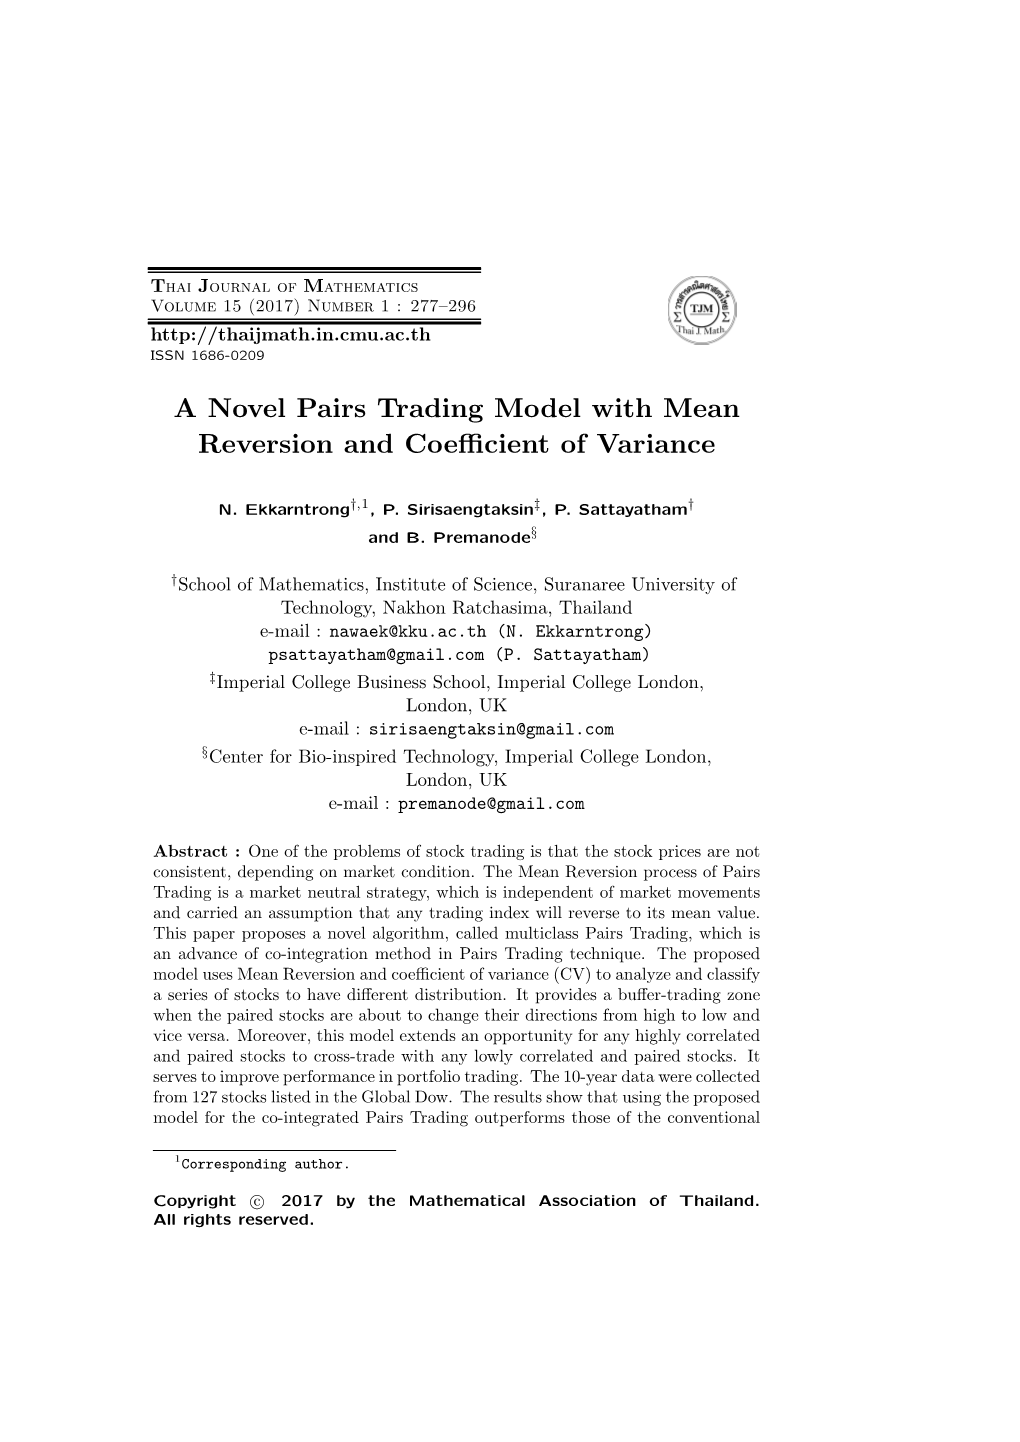 A Novel Pairs Trading Model with Mean Reversion and Coefficient Of